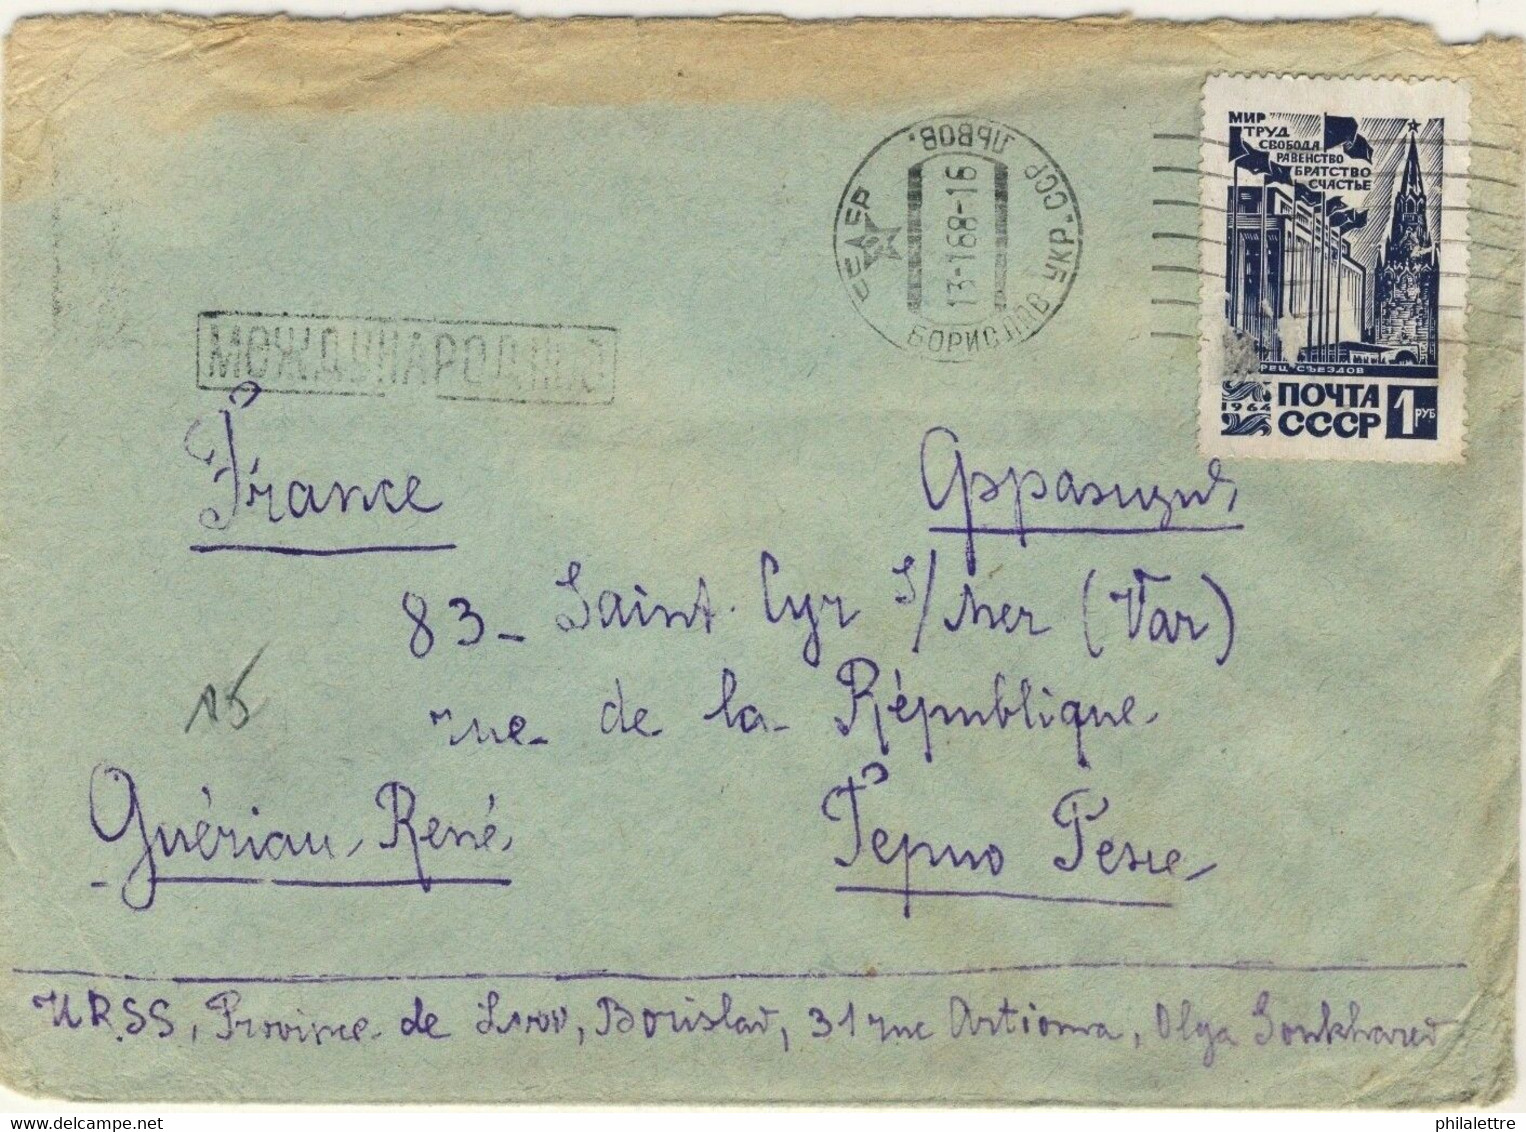 URSS Soviet Union 1968 Mi.2995 On Cover To France - Covers & Documents